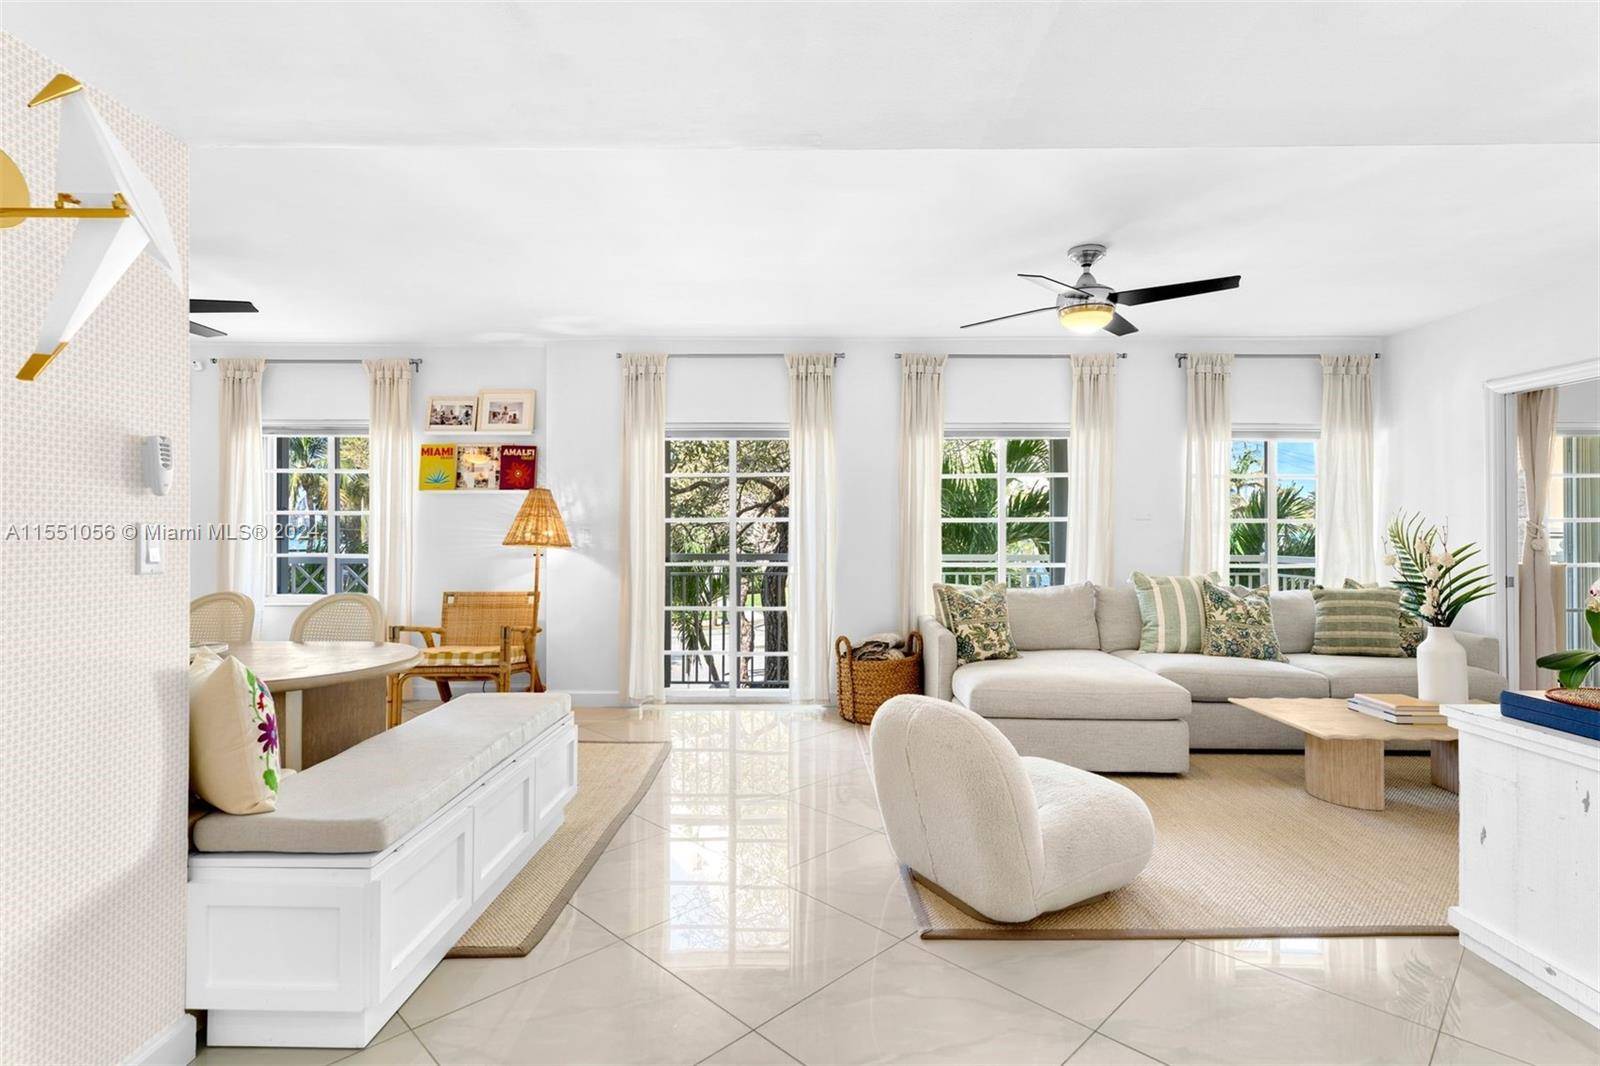 Experience resort style living at The Courts, South Beach, situated in Miami Beach's prestigious South of Fifth enclave.